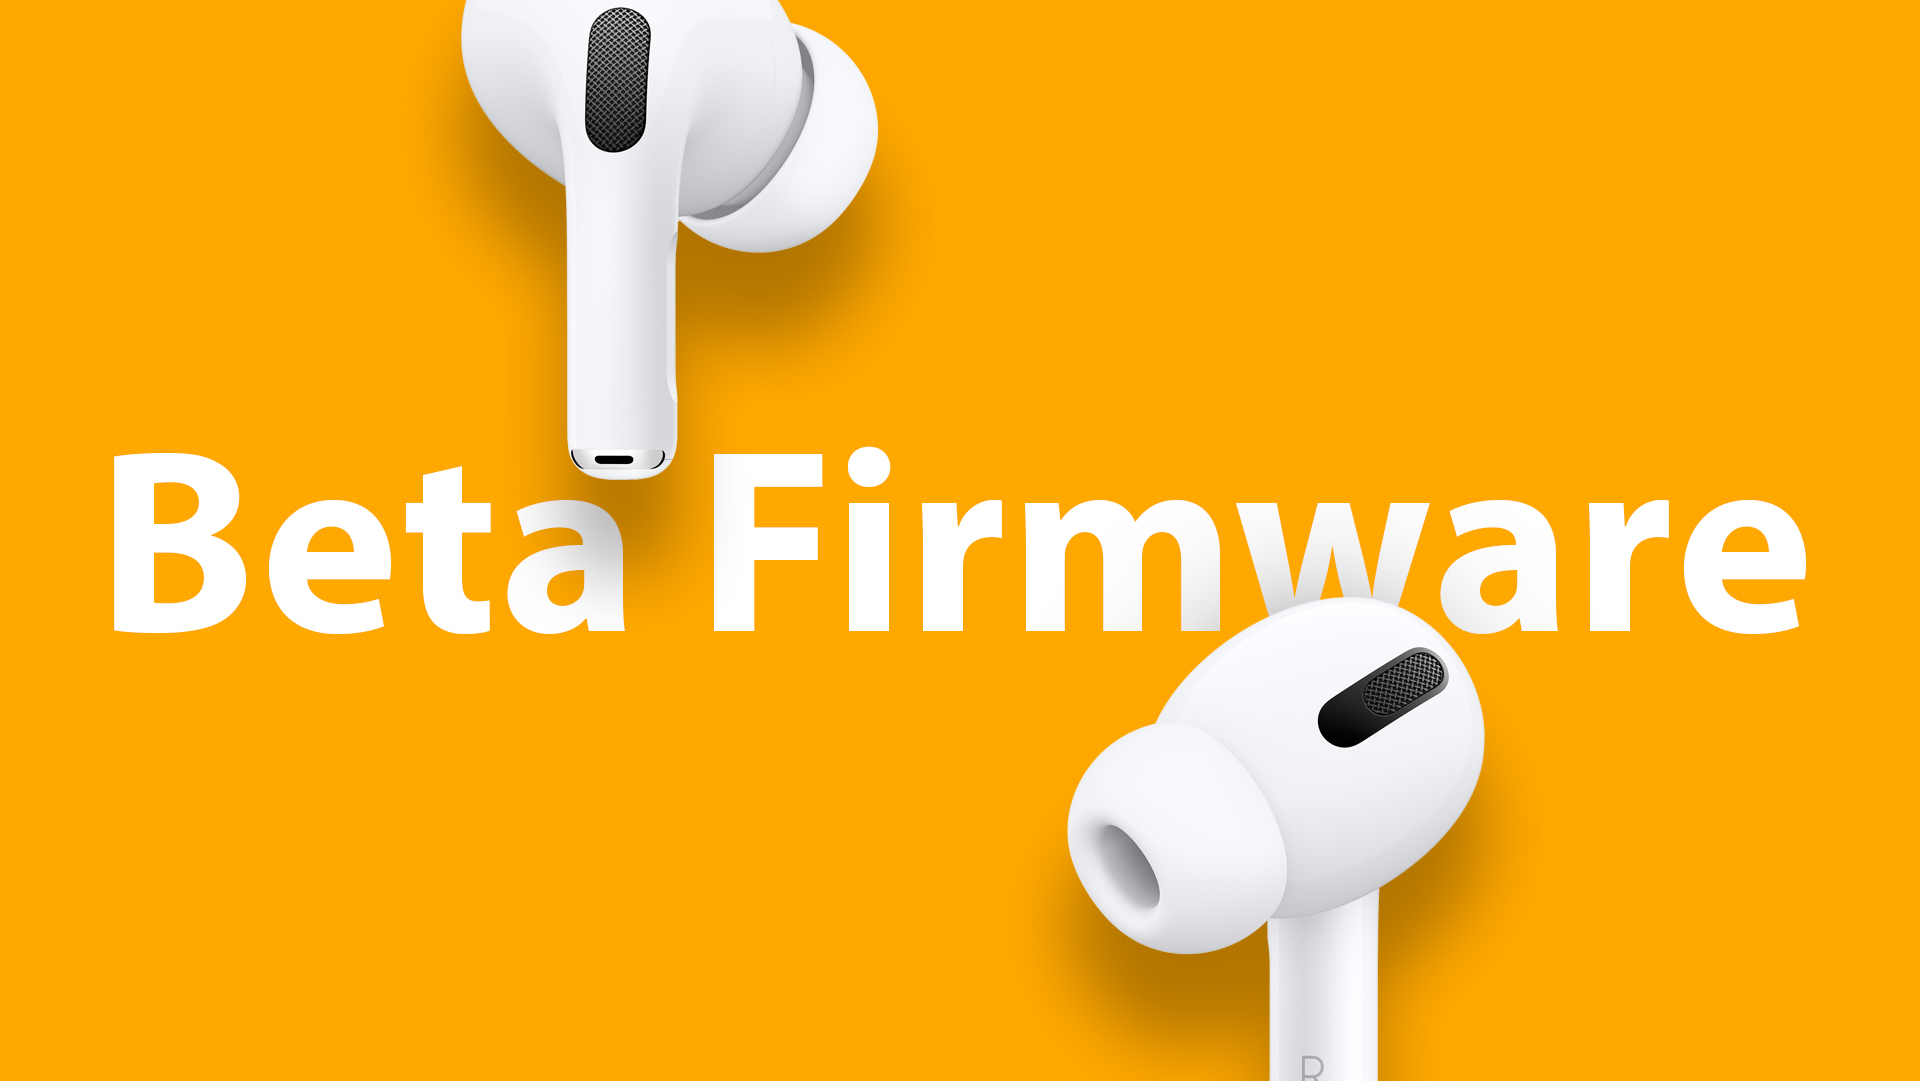 Apple Releases New Beta Firmware for AirPods, AirPods Pro and AirPods Max